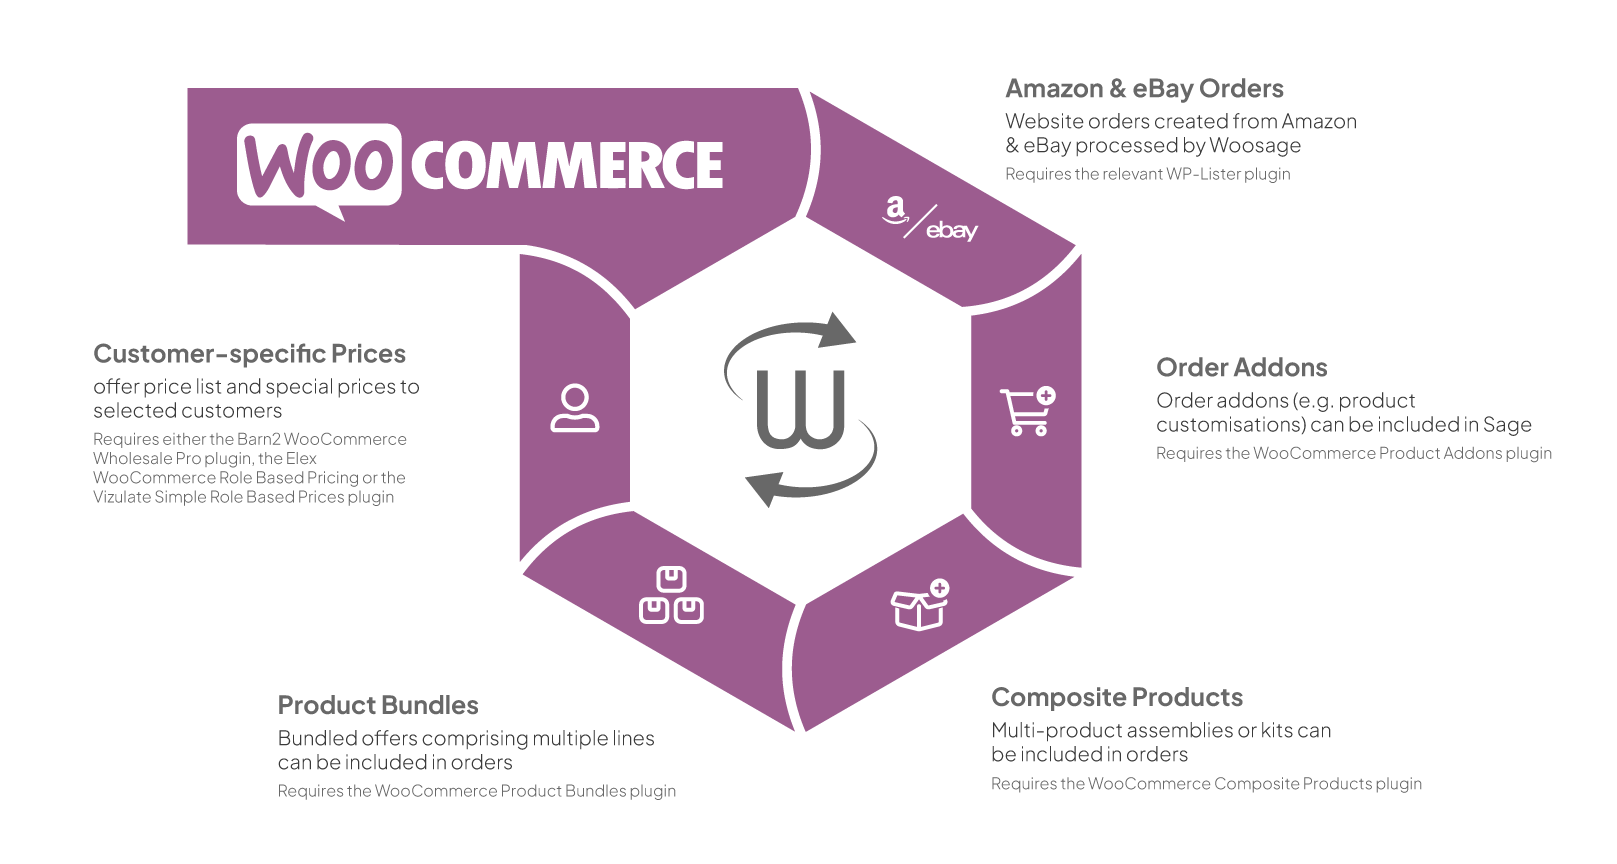 Supported WooCommerce Features